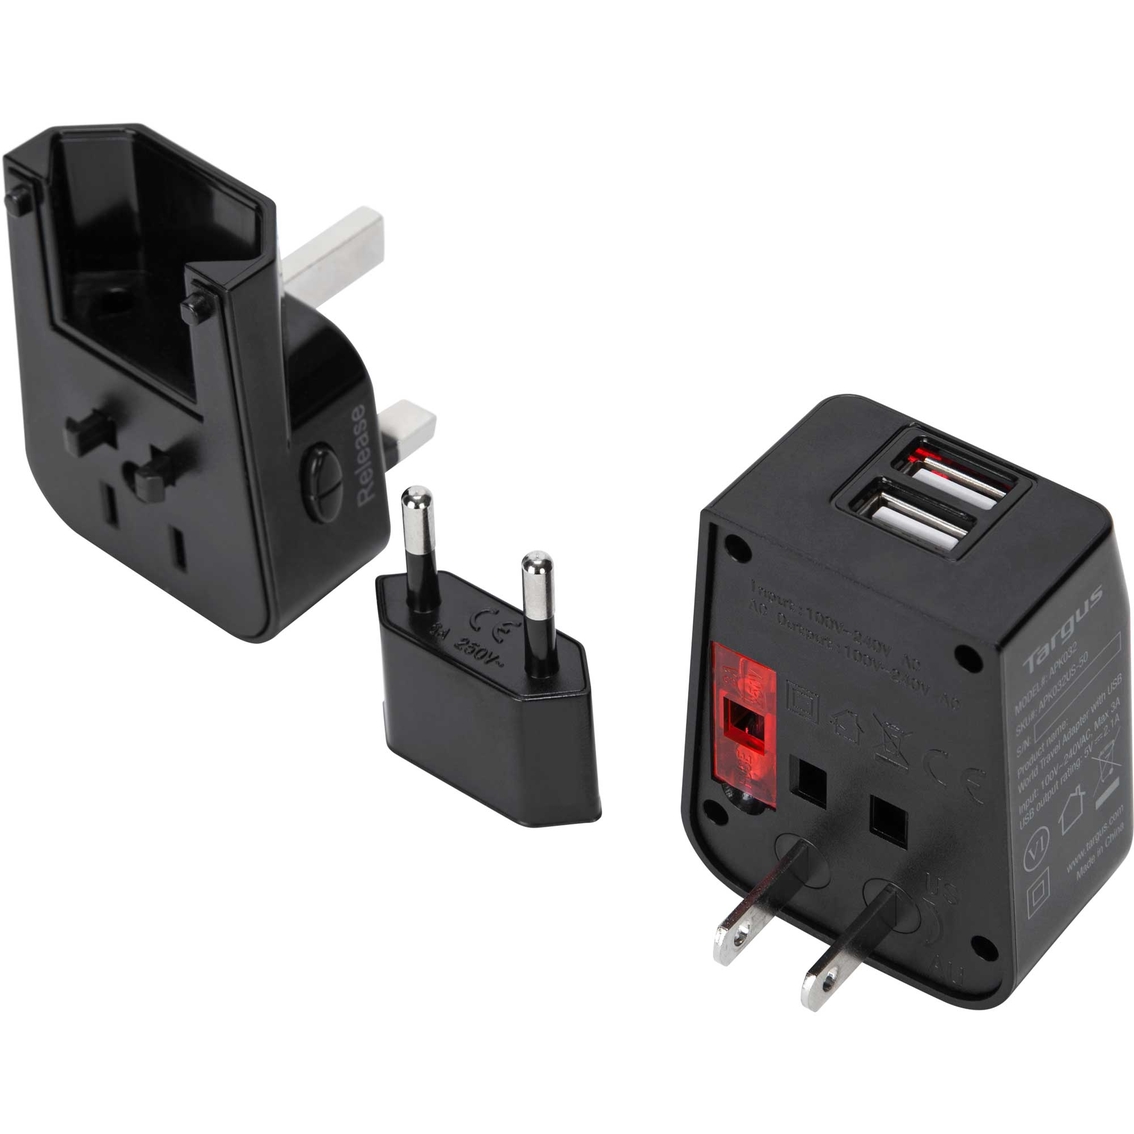 Targus World Travel Power Adapter with Dual USB Charging Ports - Image 6 of 10